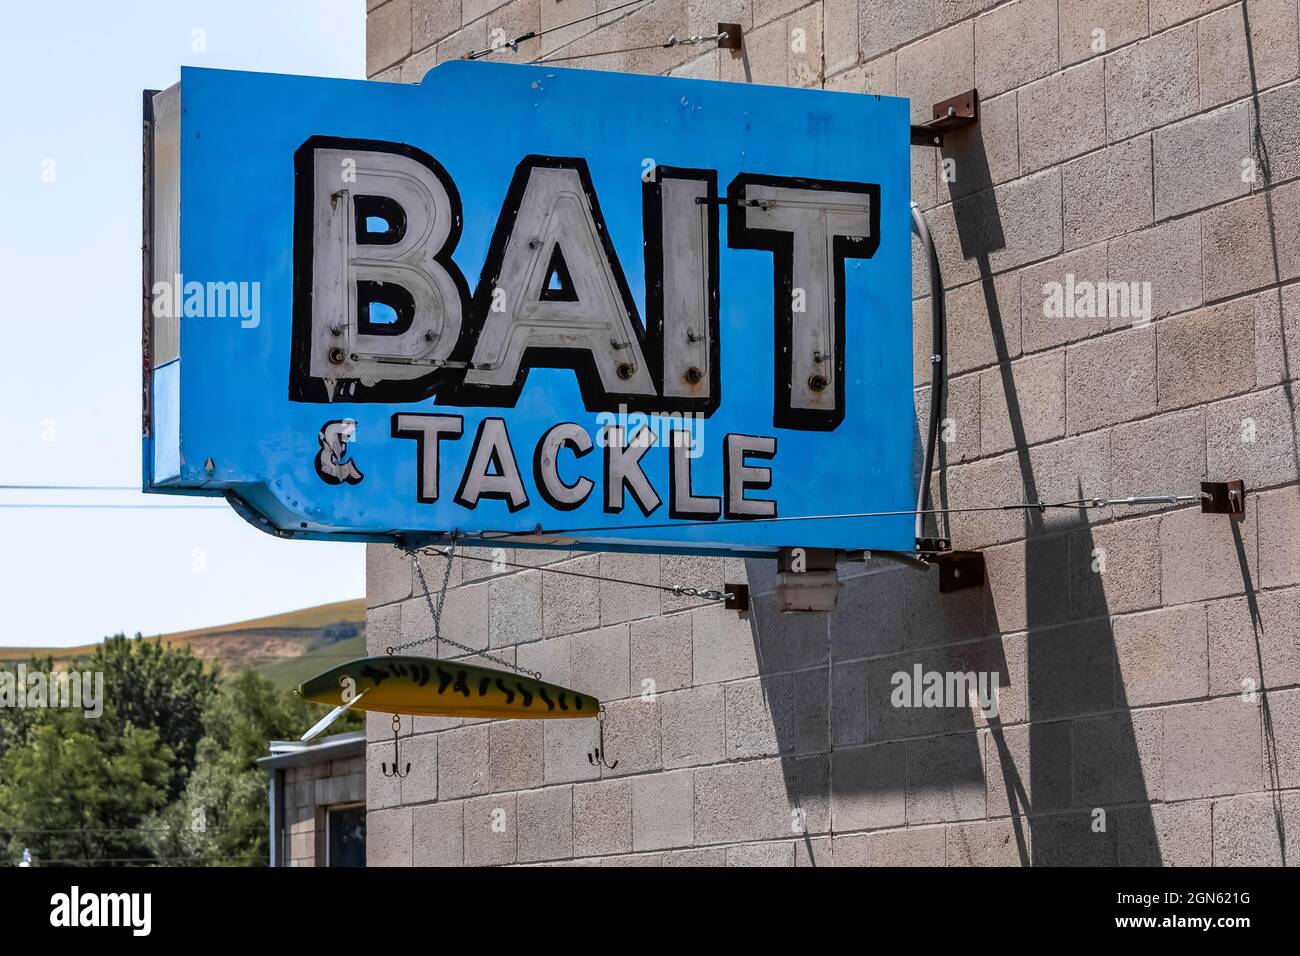 Old building with Bait & Tackle sign in an alley in Pomeroy, Washington State, USA [No property release; editorial licensing only] Stock Photo